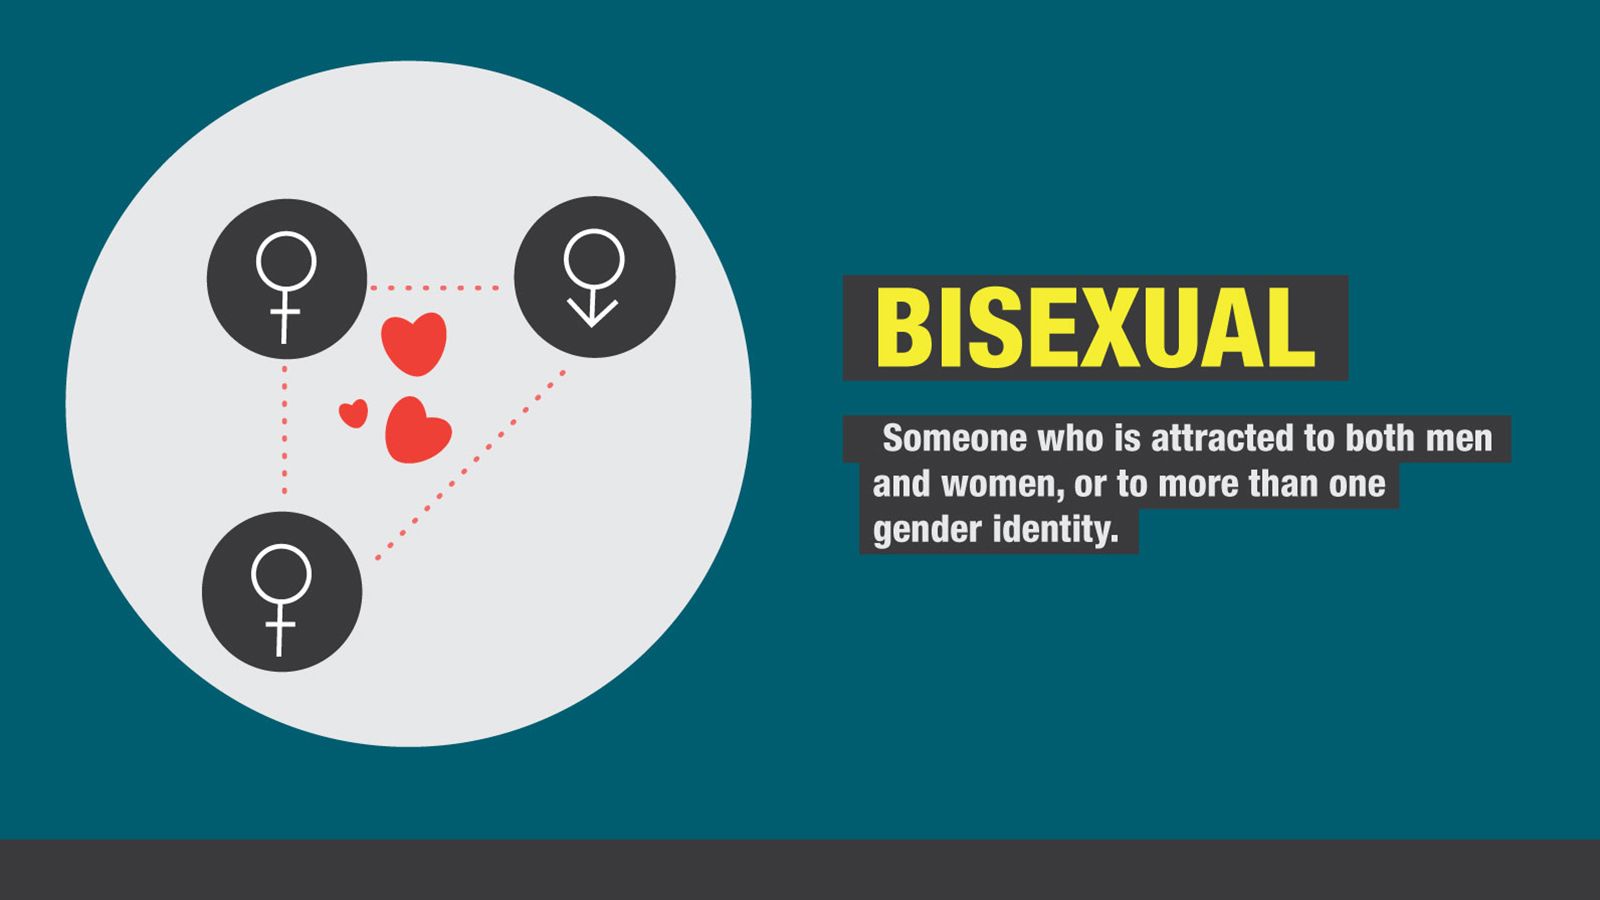 Bisexual Sports - Bisexuality on the rise, says new U.S. survey | CNN